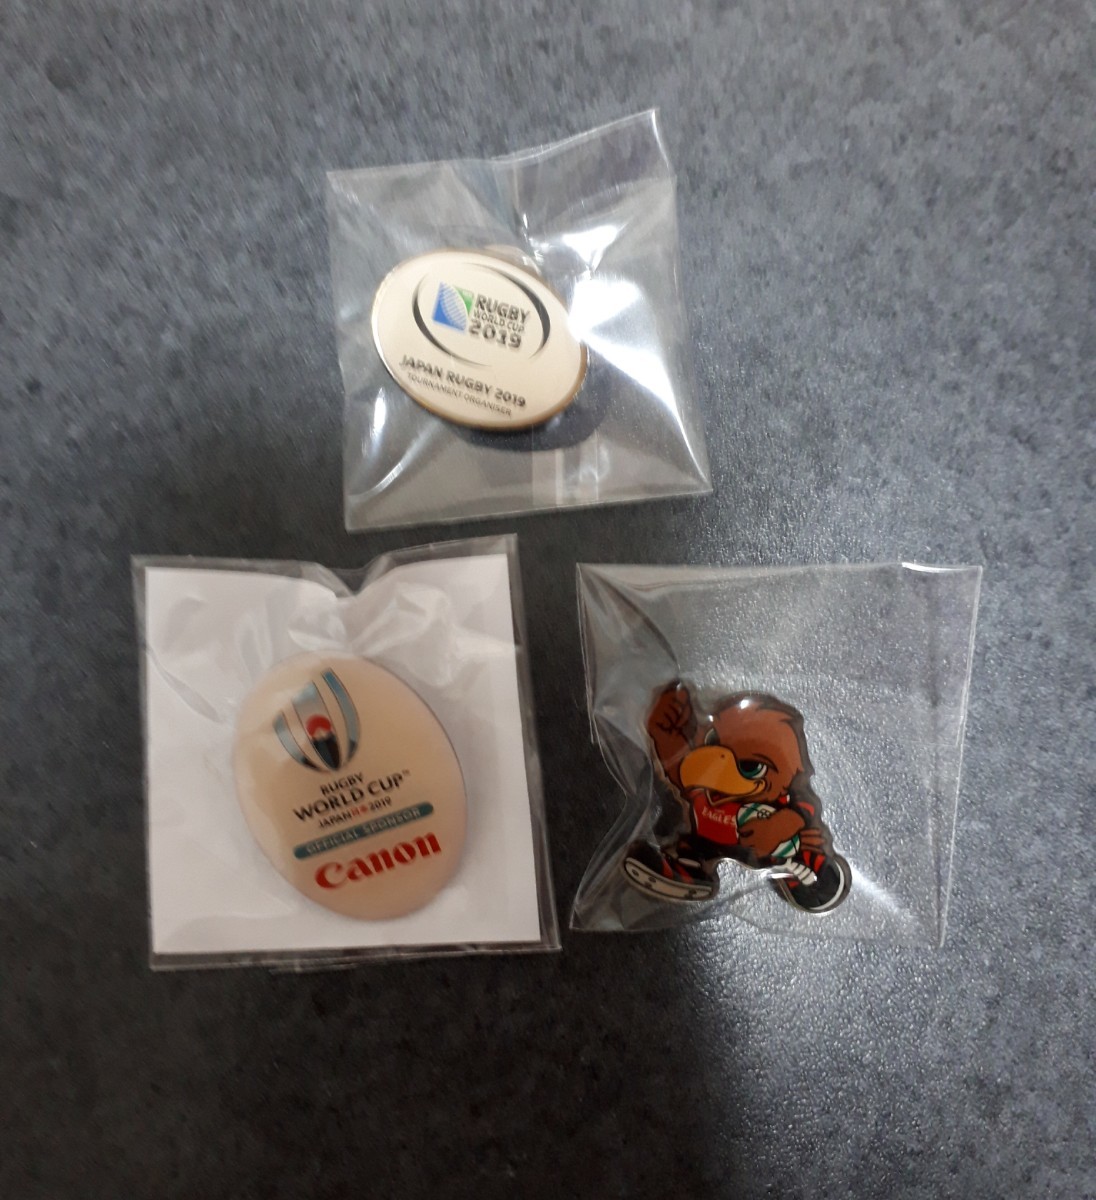  rugby World Cup pin bachi pin badge 3 piece set 2019 pin z Canon unused 